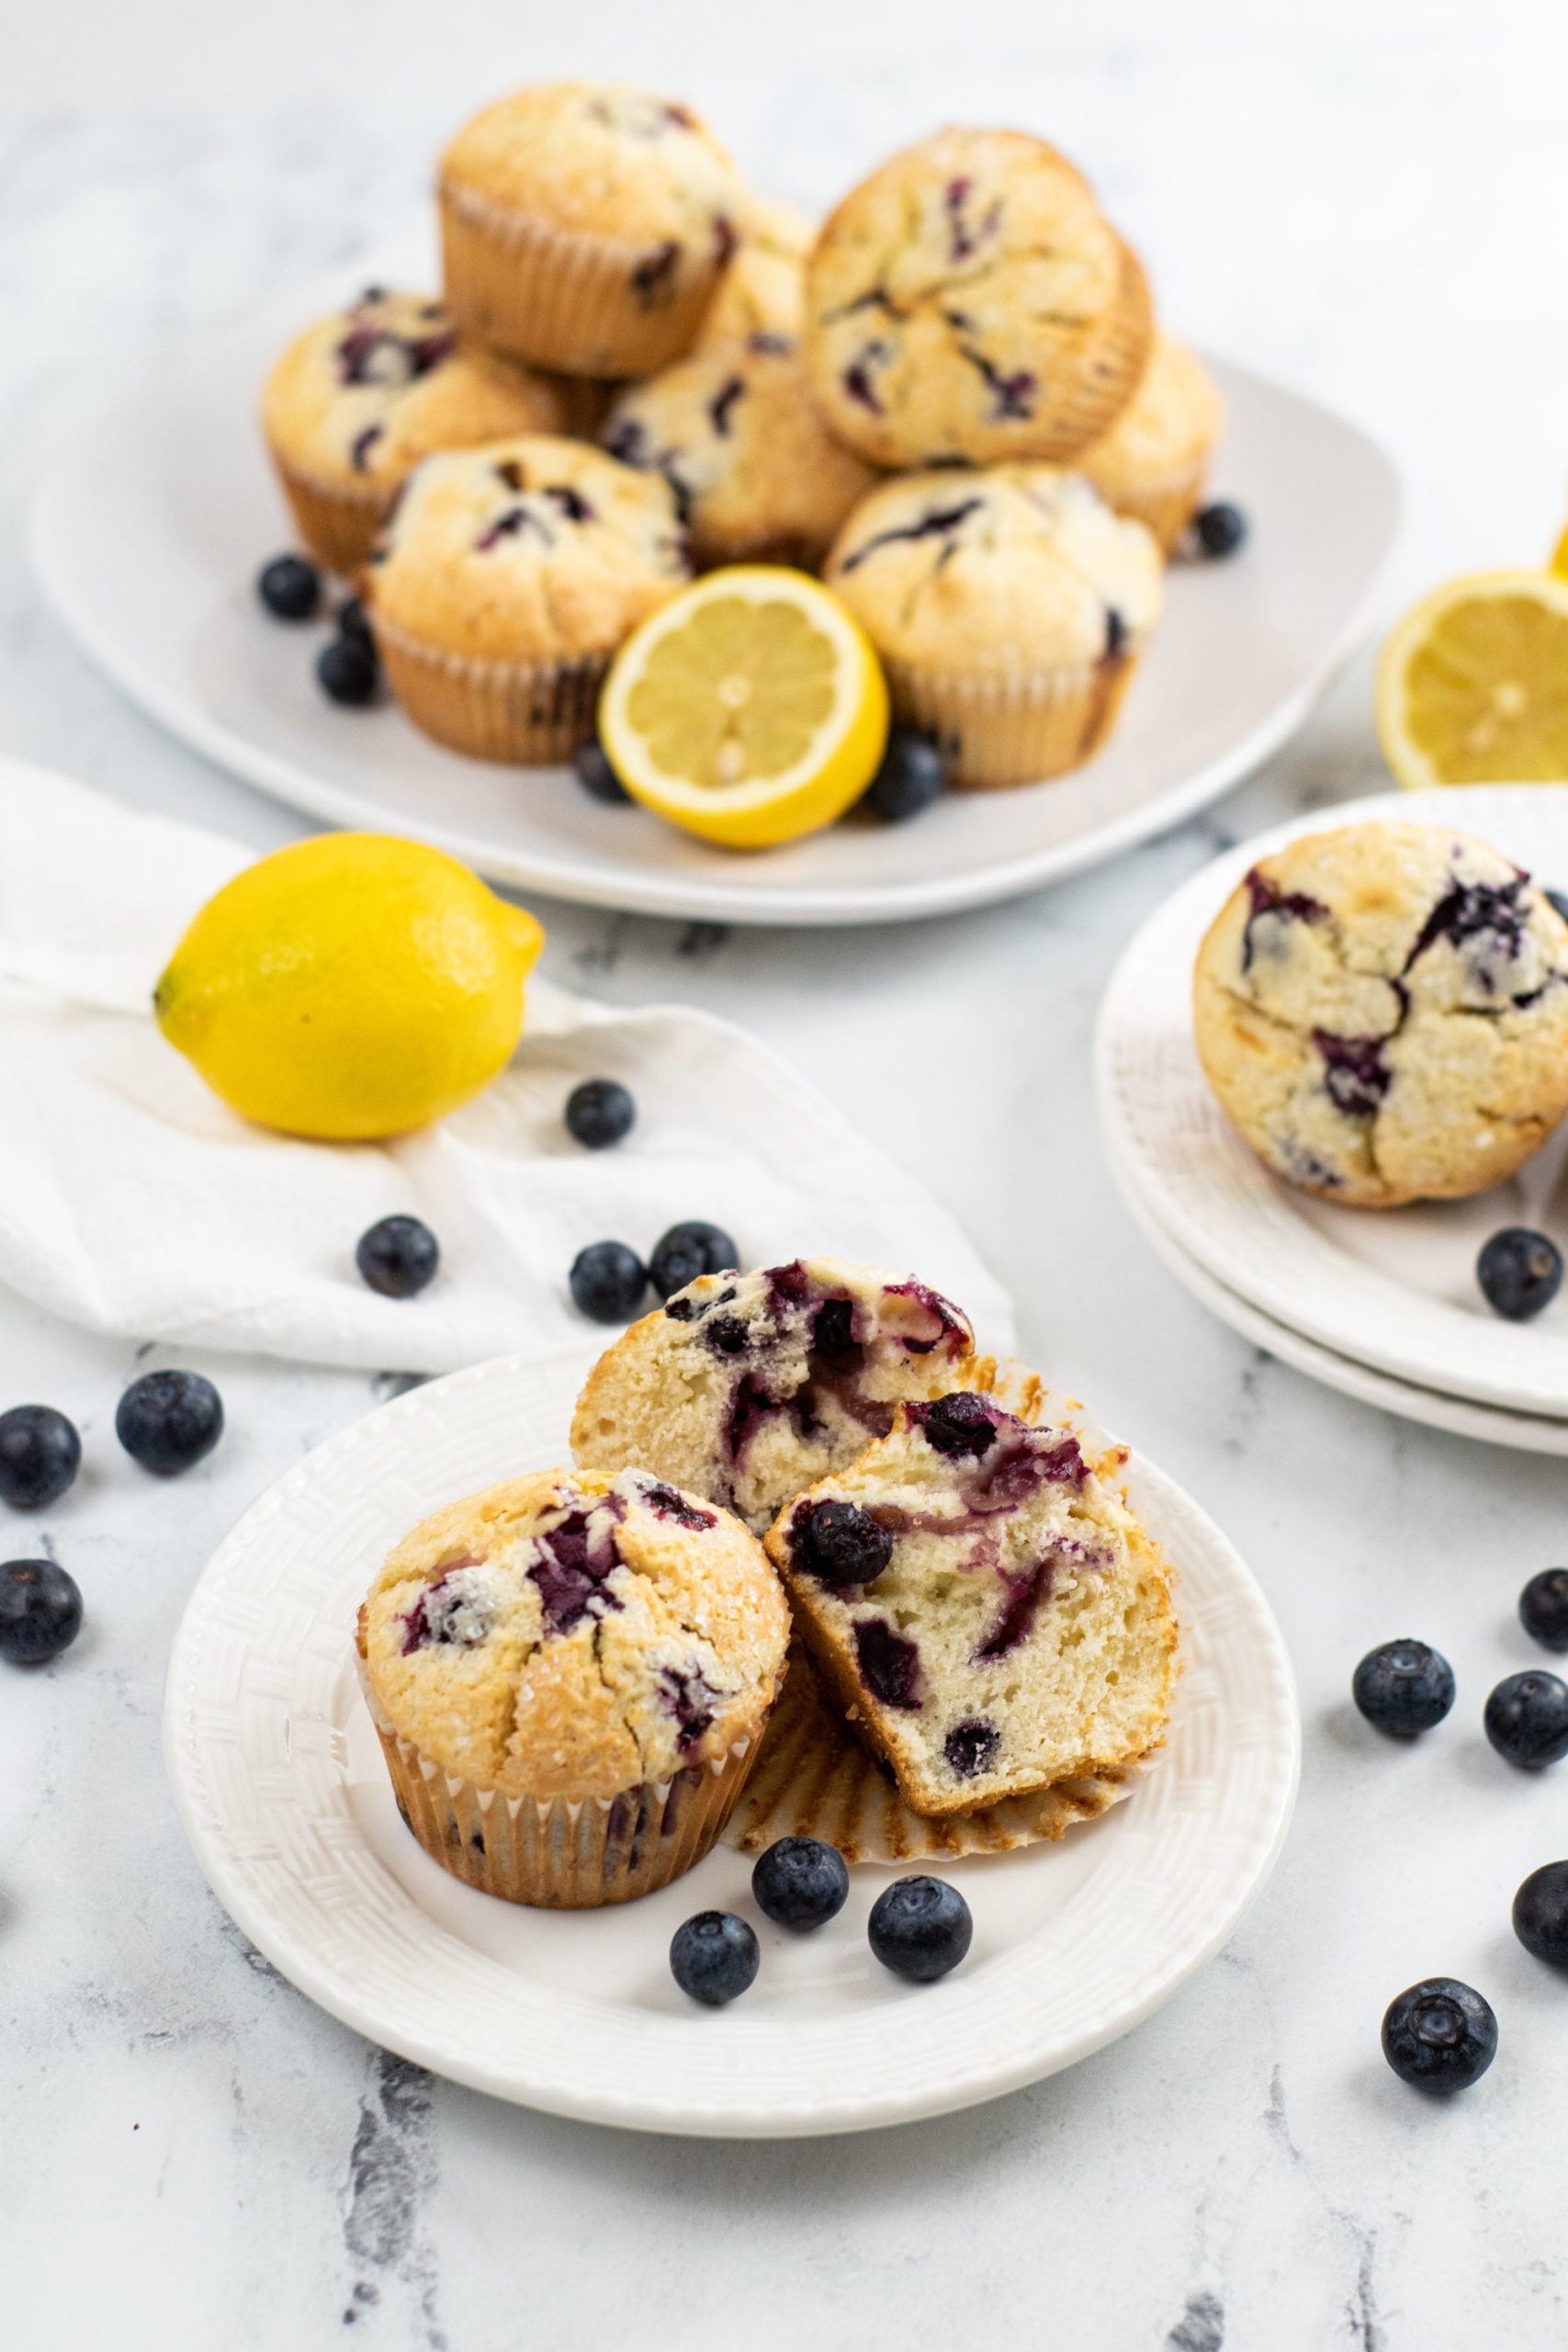 Plate of 3 blueberry lemon muffin with a lemon and a large plate of muffins in the background.